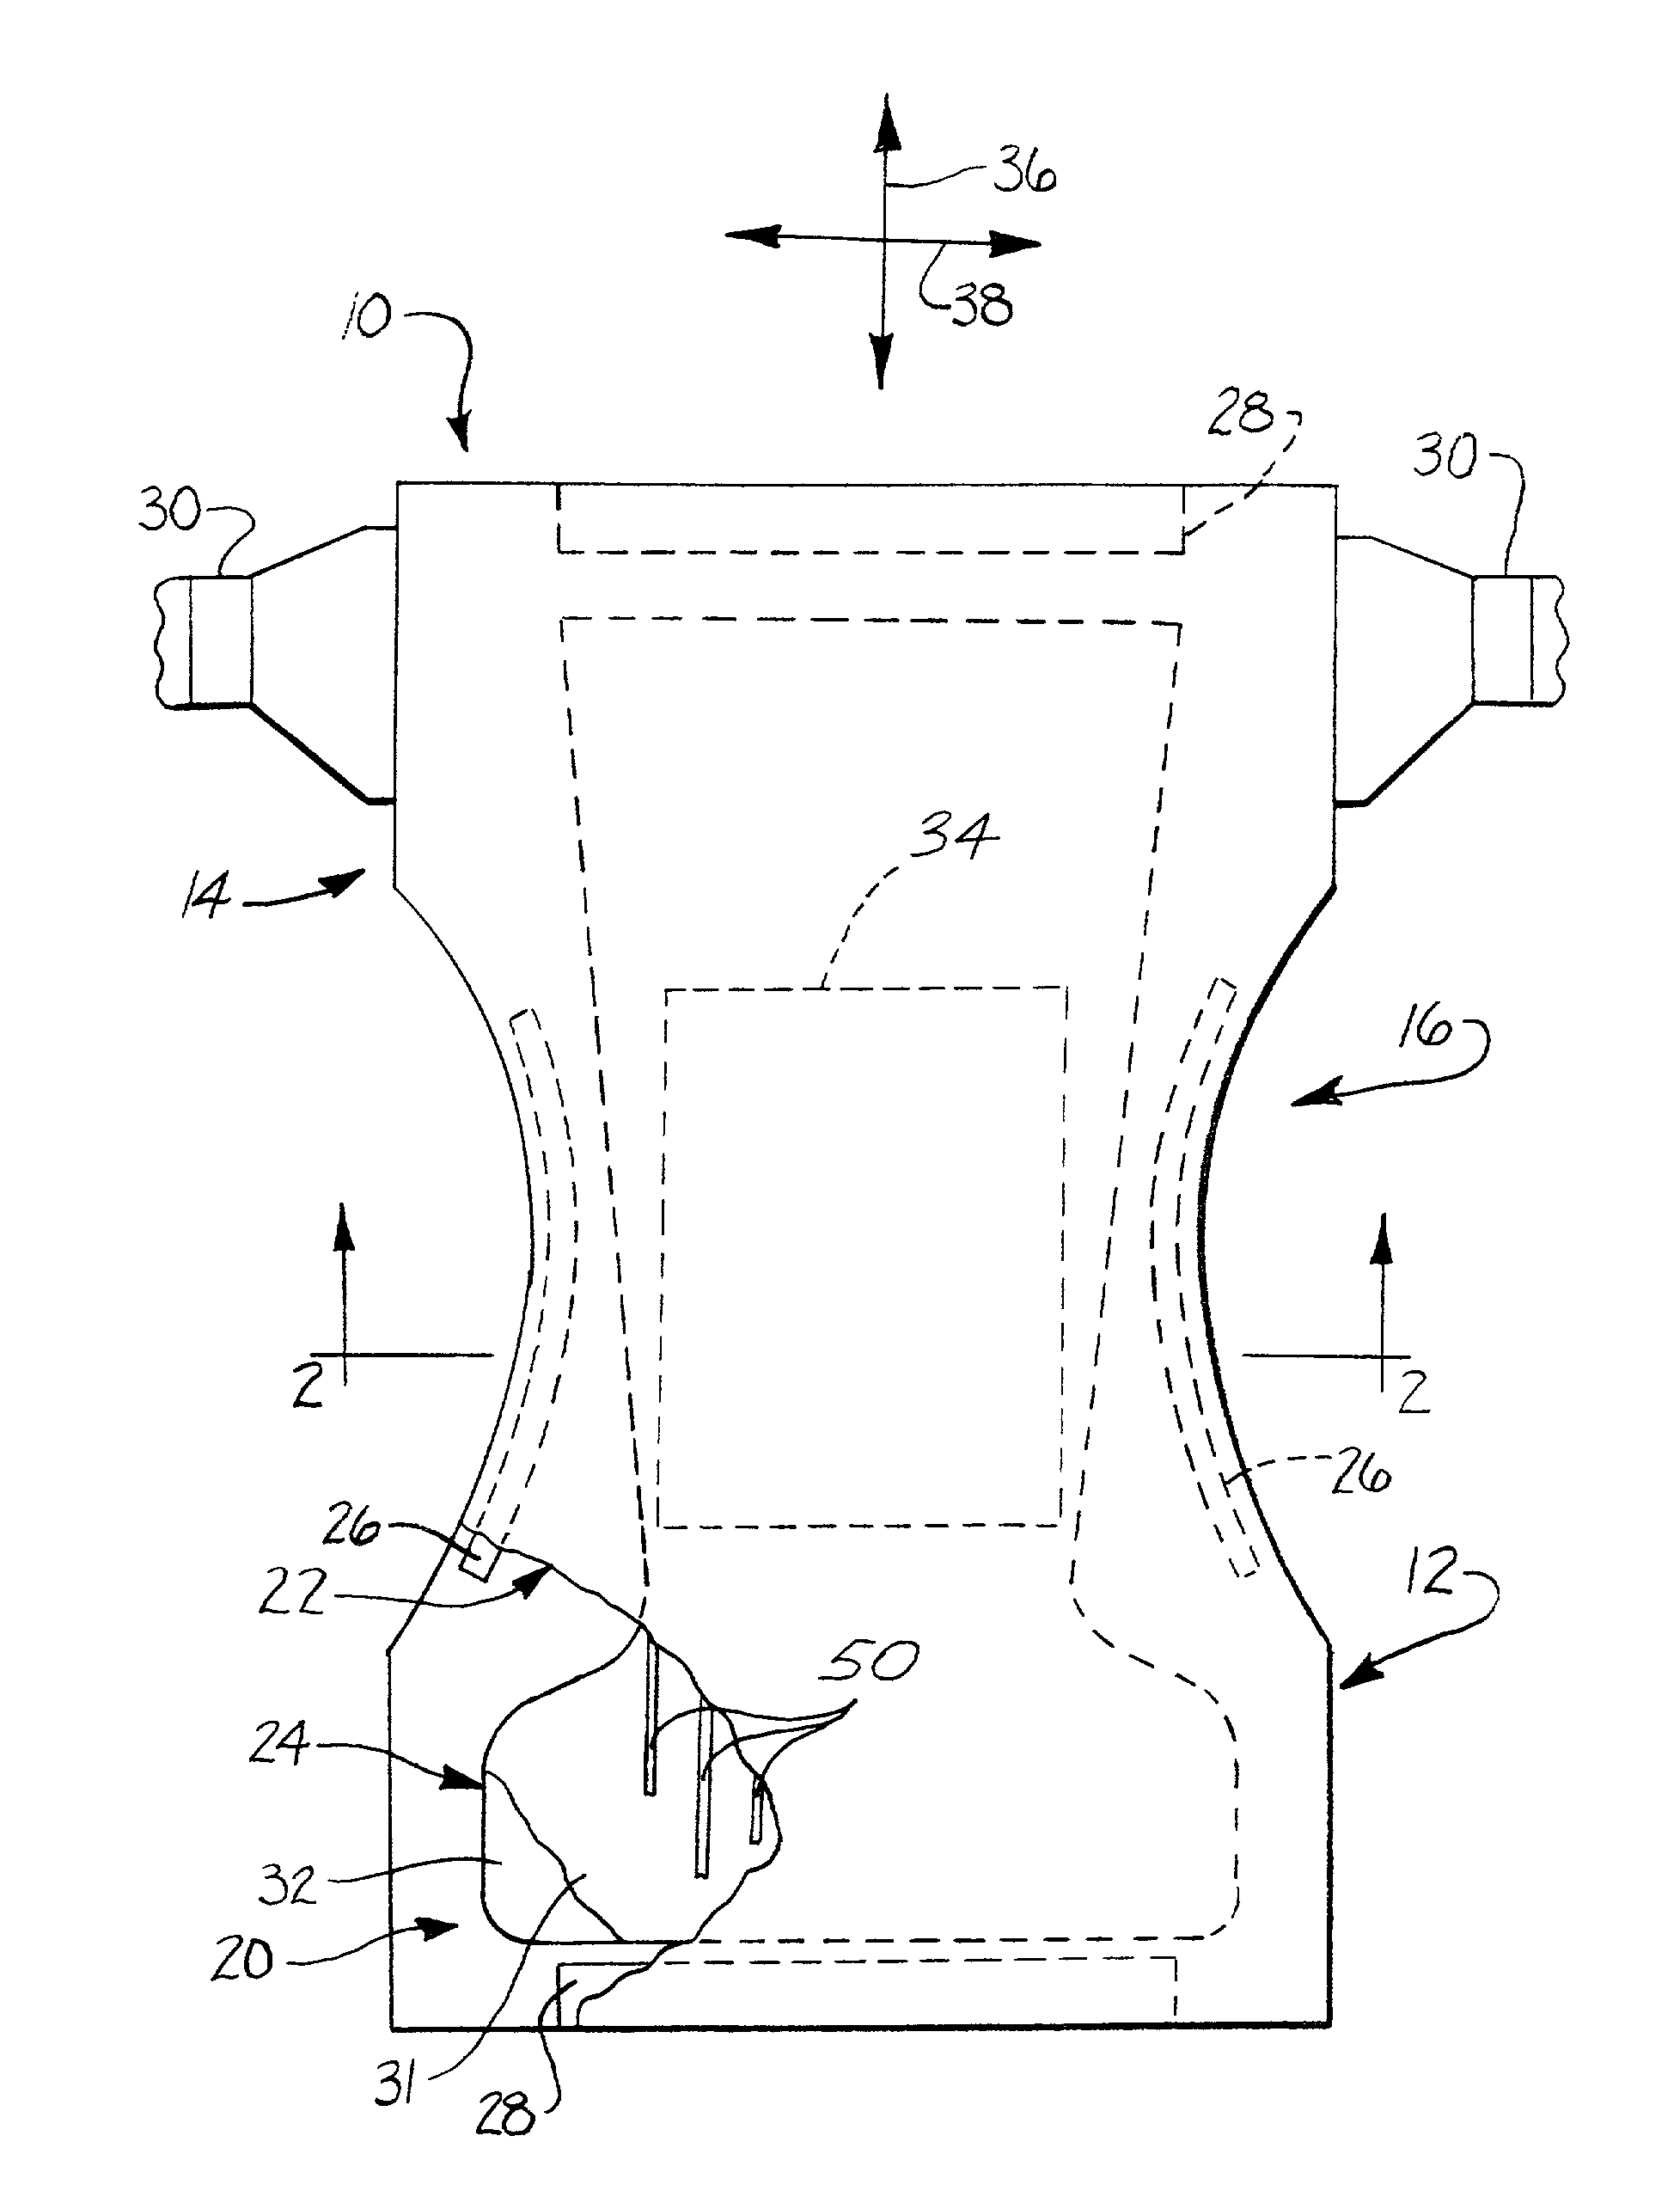 Absorbent articles with absorbent pad gapping